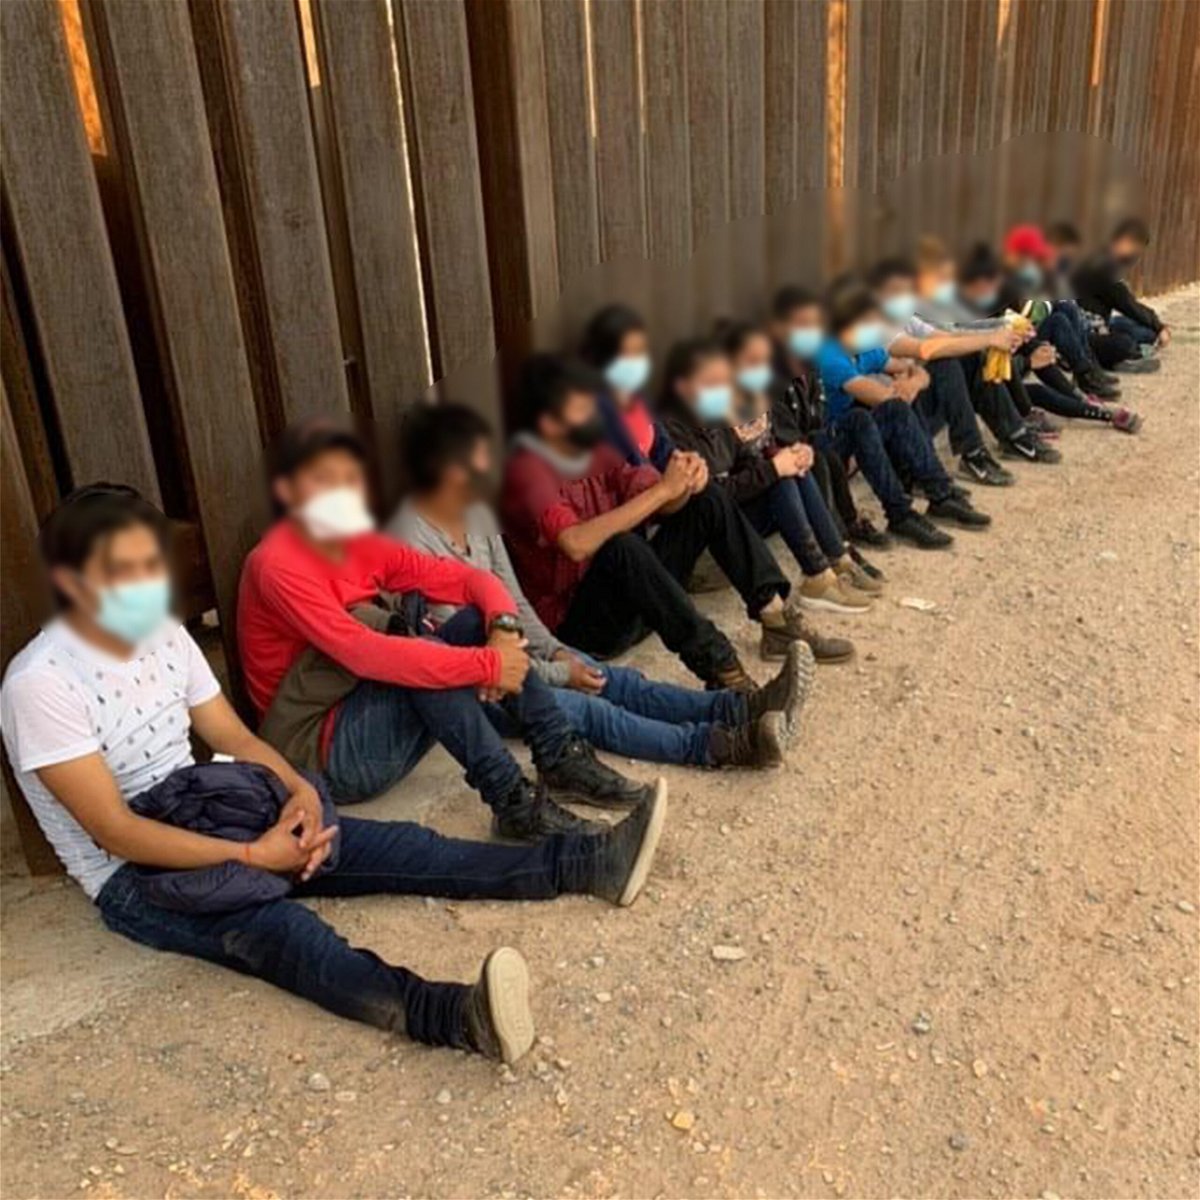 A group of unaccompanied migrant children apprehended by Border Patrol agents near the Ysleta Port of Entry.